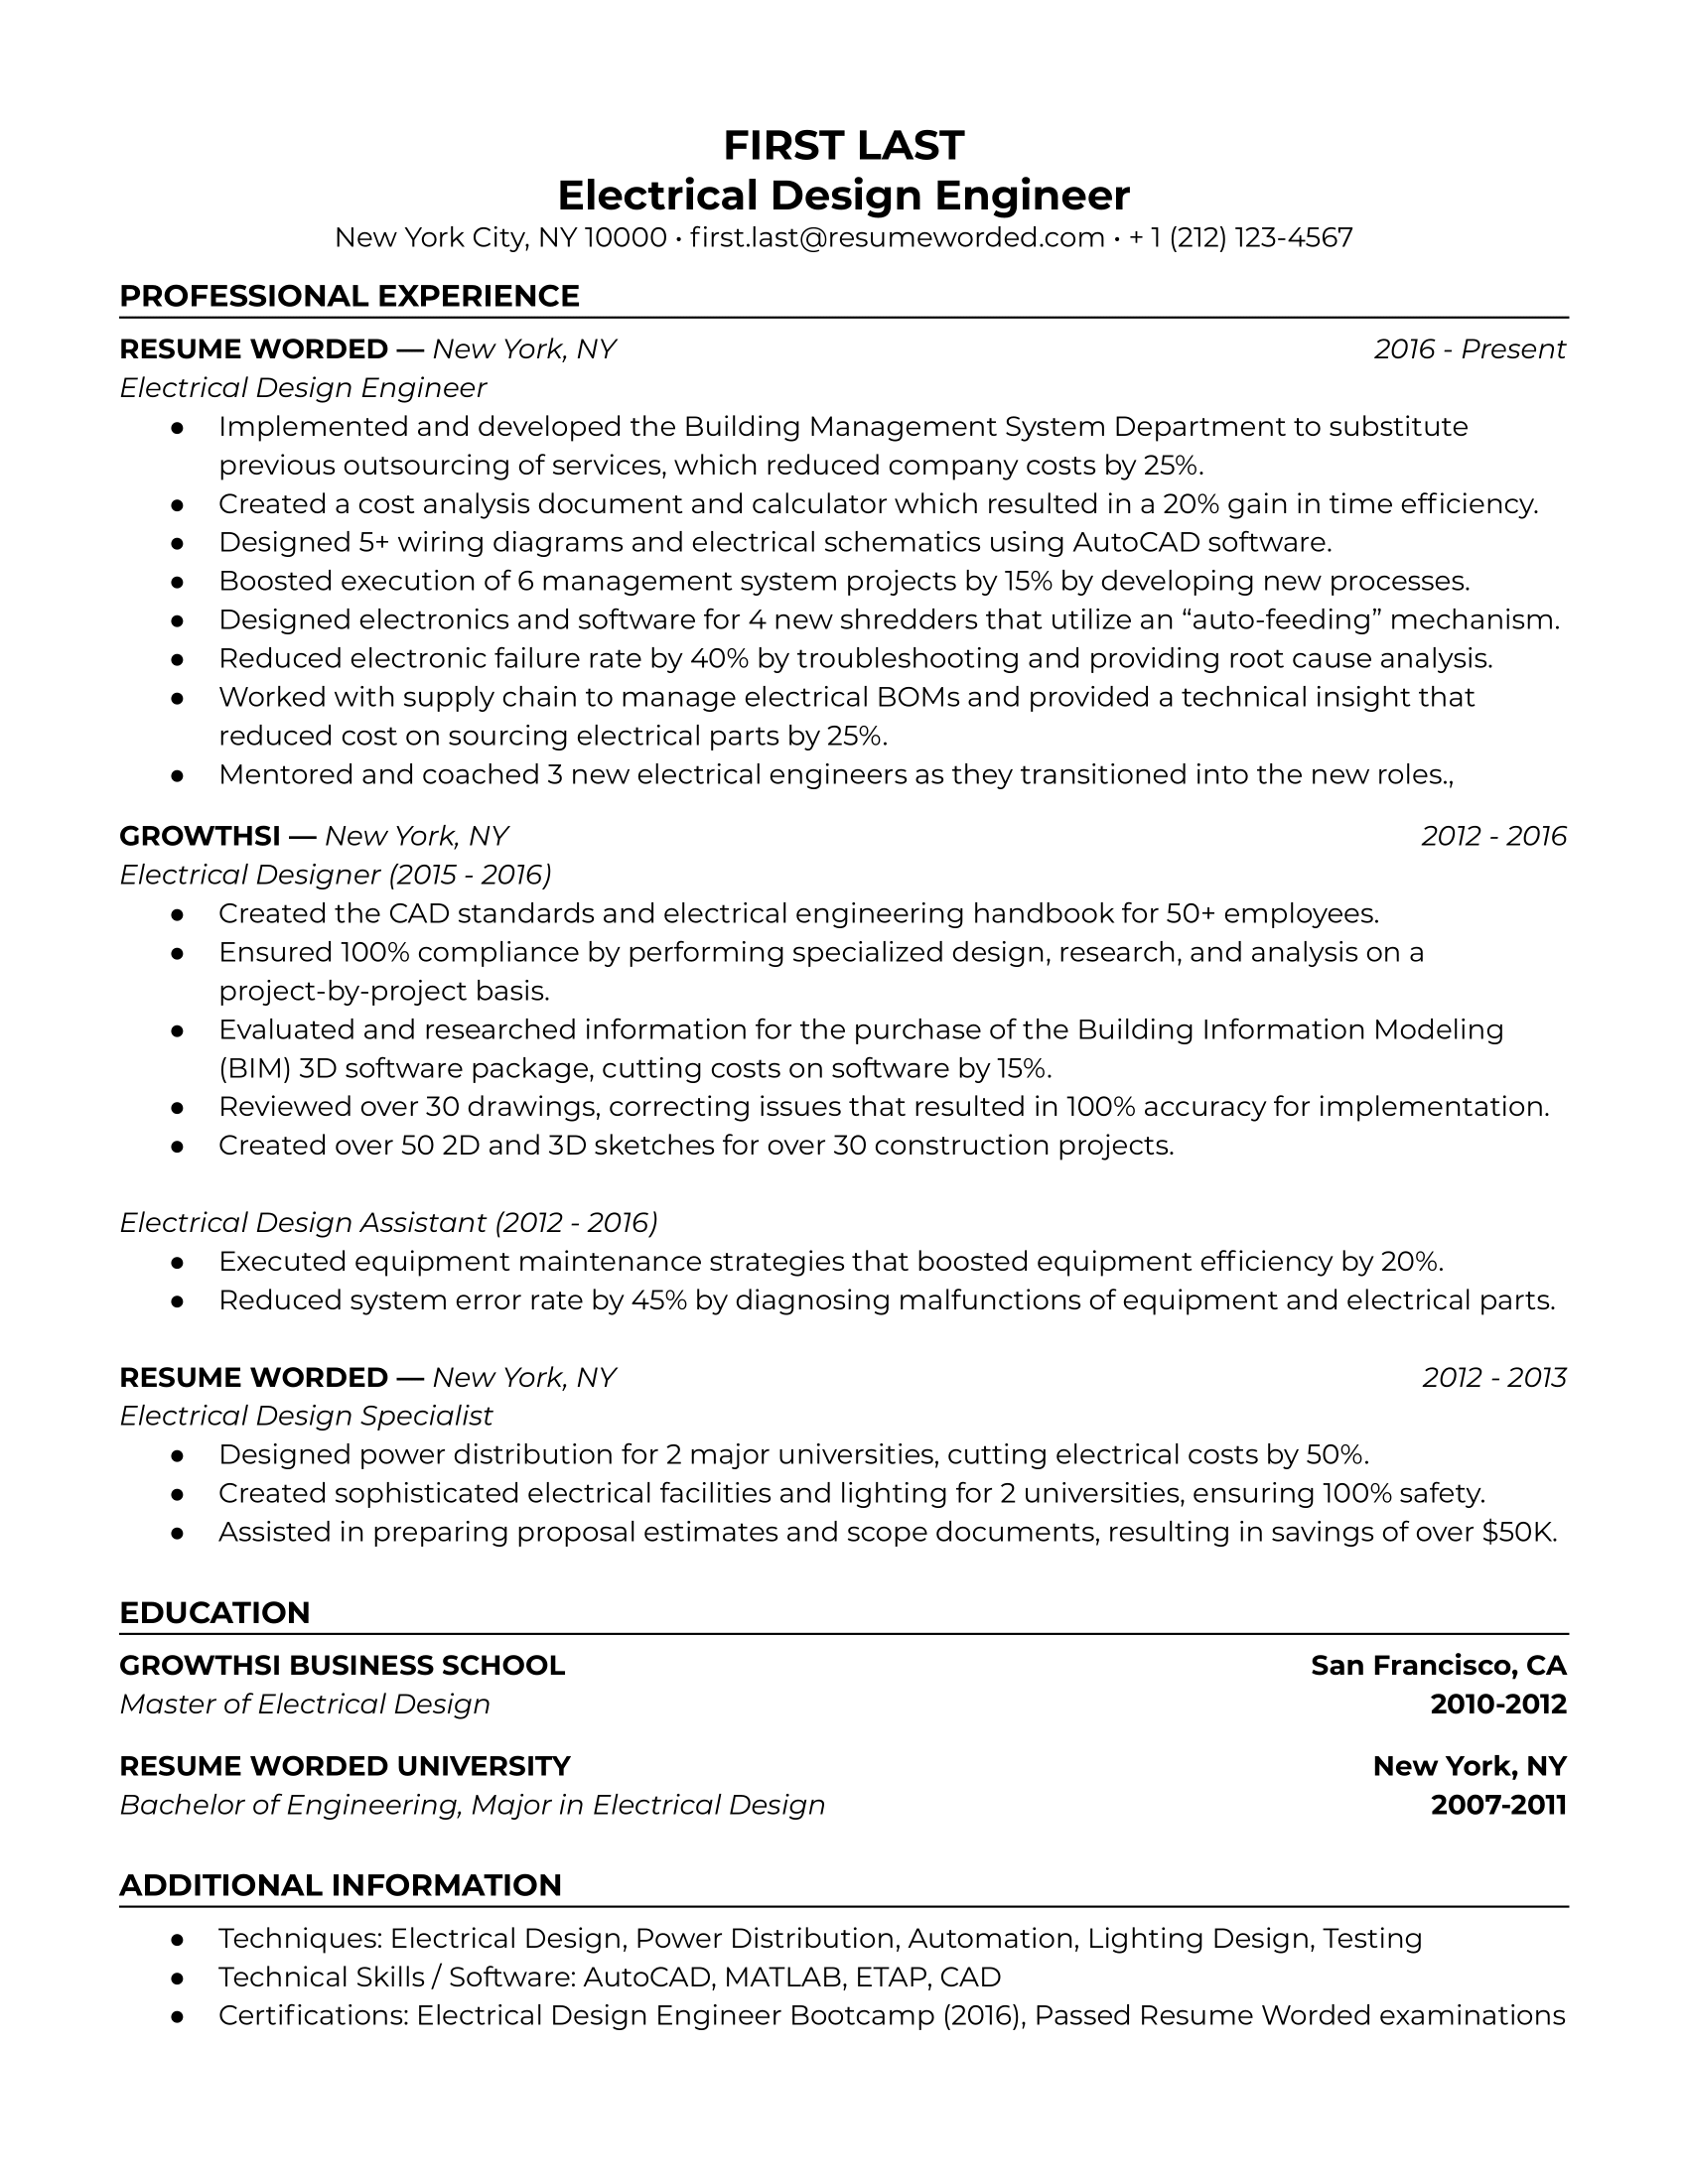 Electrical Design Engineer Resume Template + Example